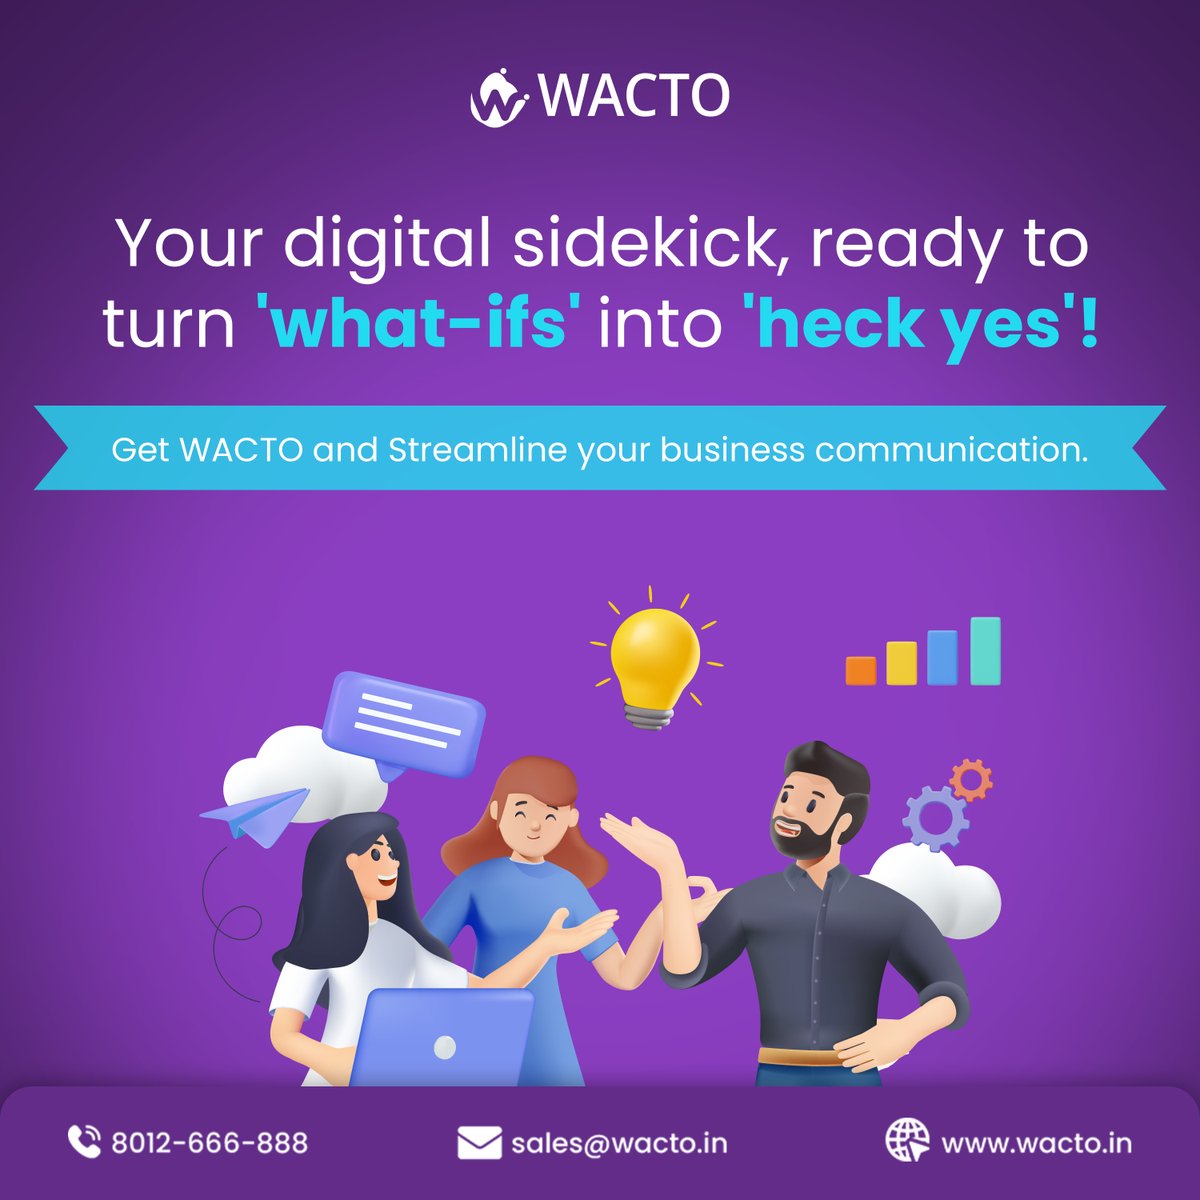 Say goodbye to 'what-ifs' and hello to 'heck yes' with WACTO! 🚀 Streamline your business communication effortlessly. Get started today!
#WACTO #BusinessCommunication #OmniChannel #BusinessAutomation